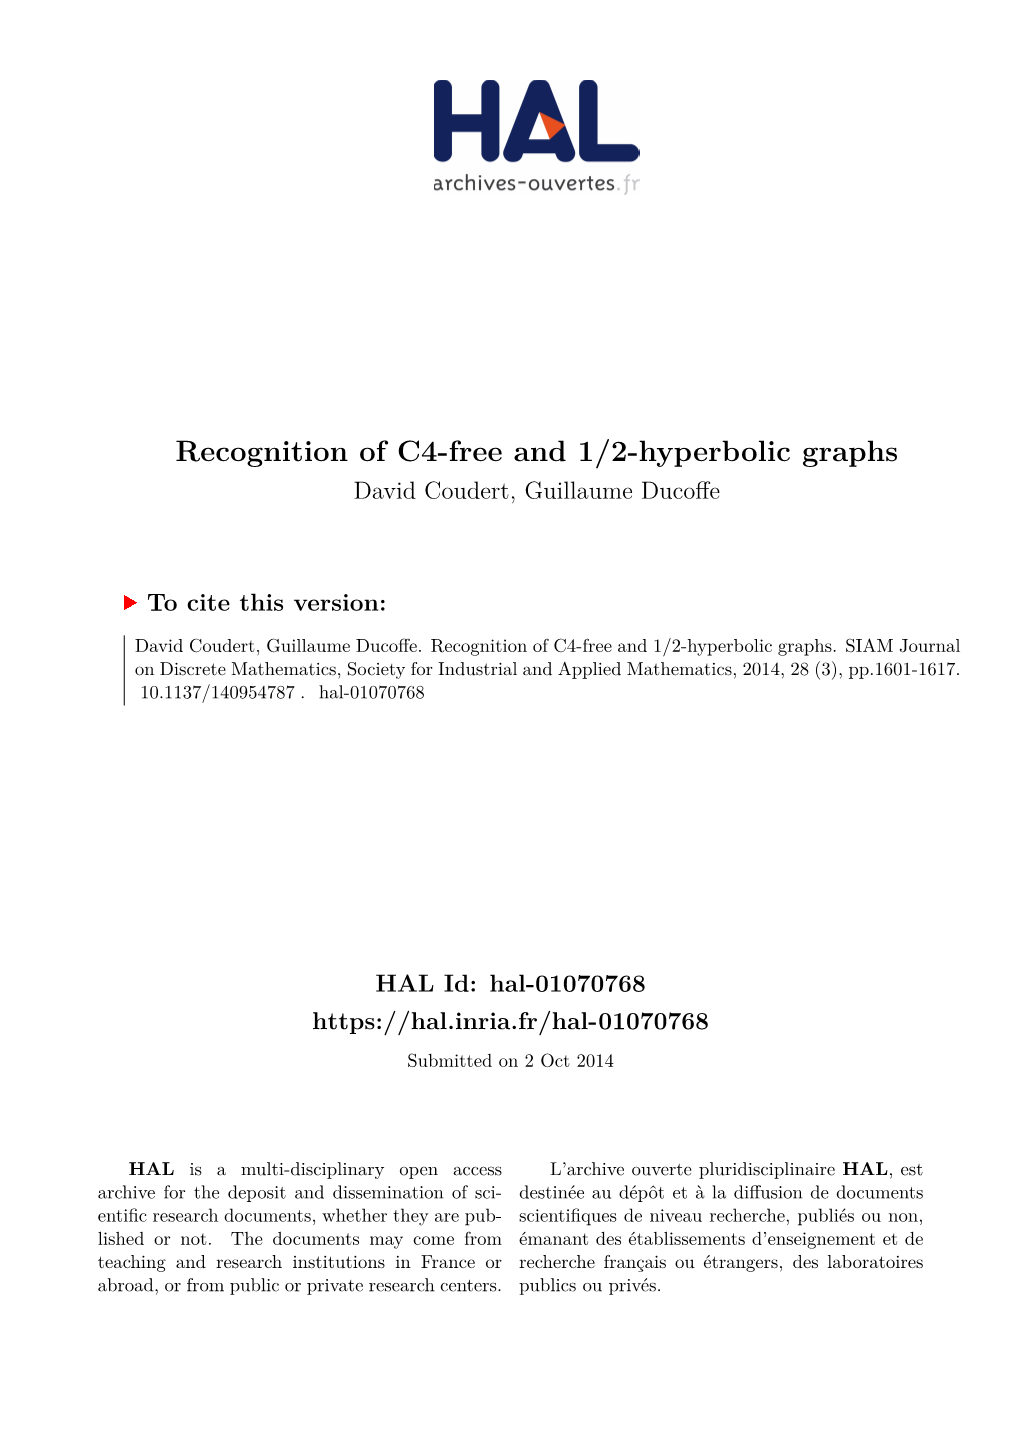 Recognition of C4-Free and 1/2-Hyperbolic Graphs David Coudert, Guillaume Ducoffe